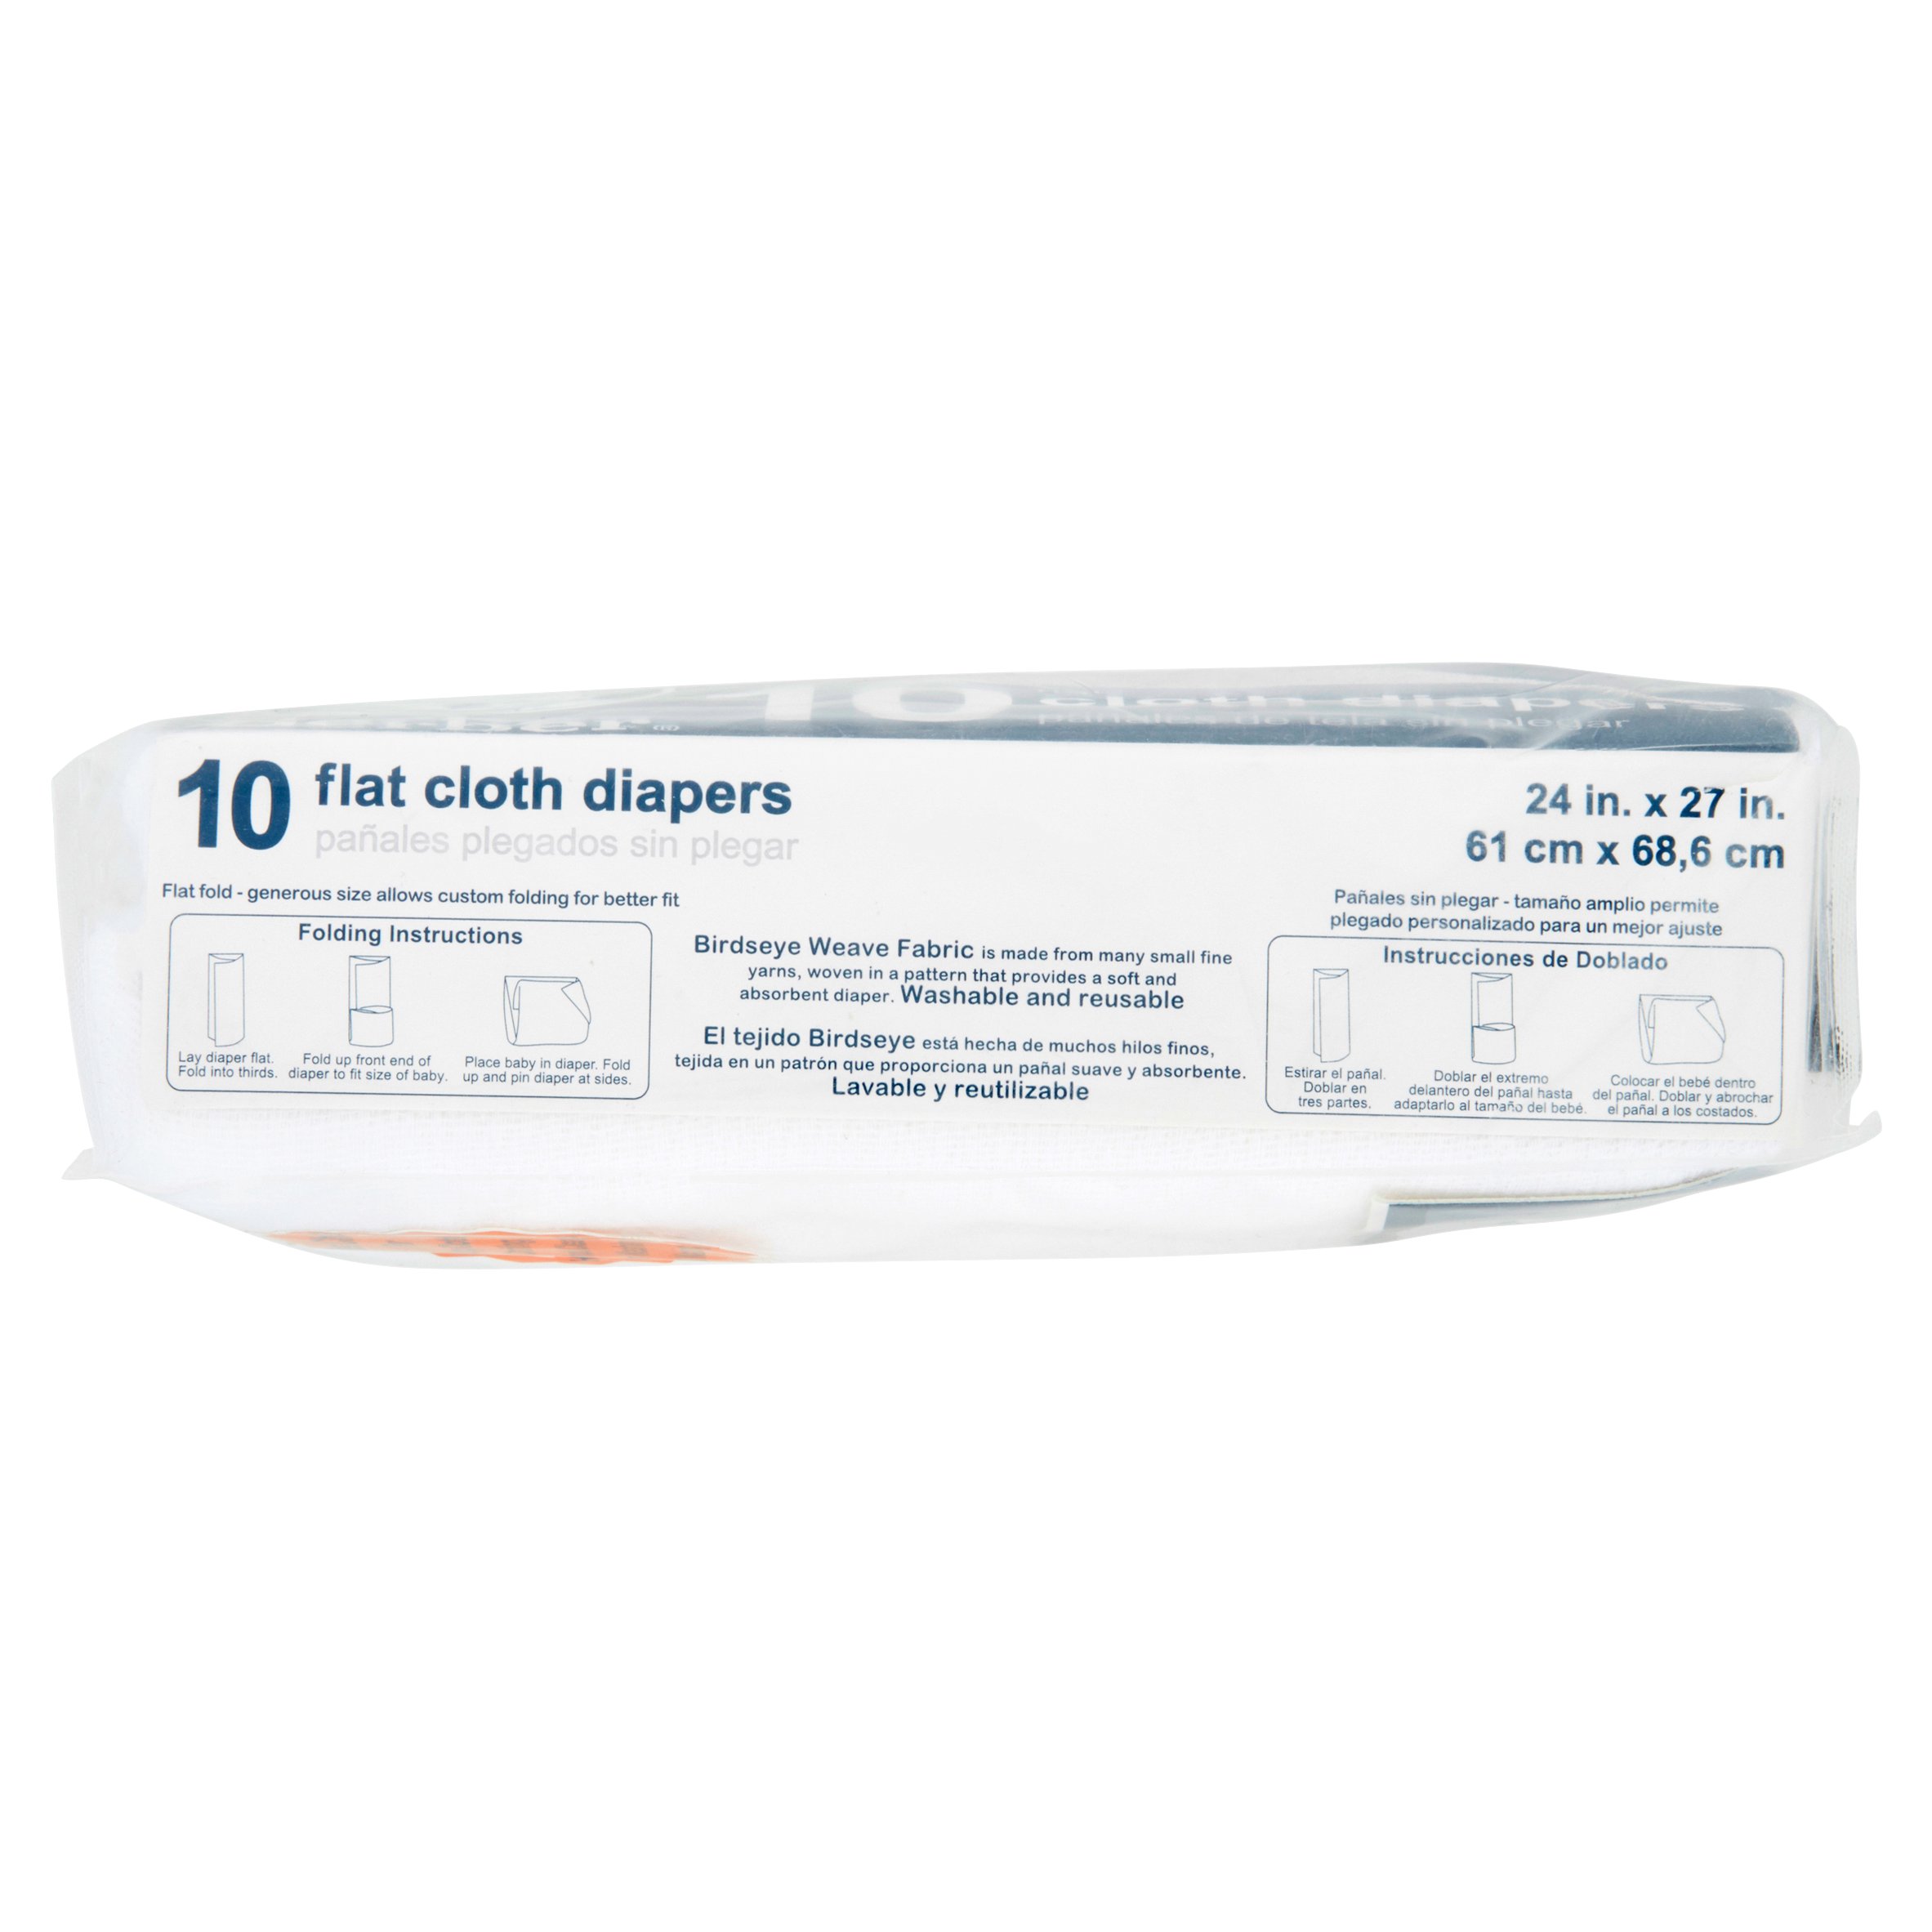 Gerber 100% Cotton Flatfold Cloth Baby Diaper, White 10 Pack - image 5 of 8